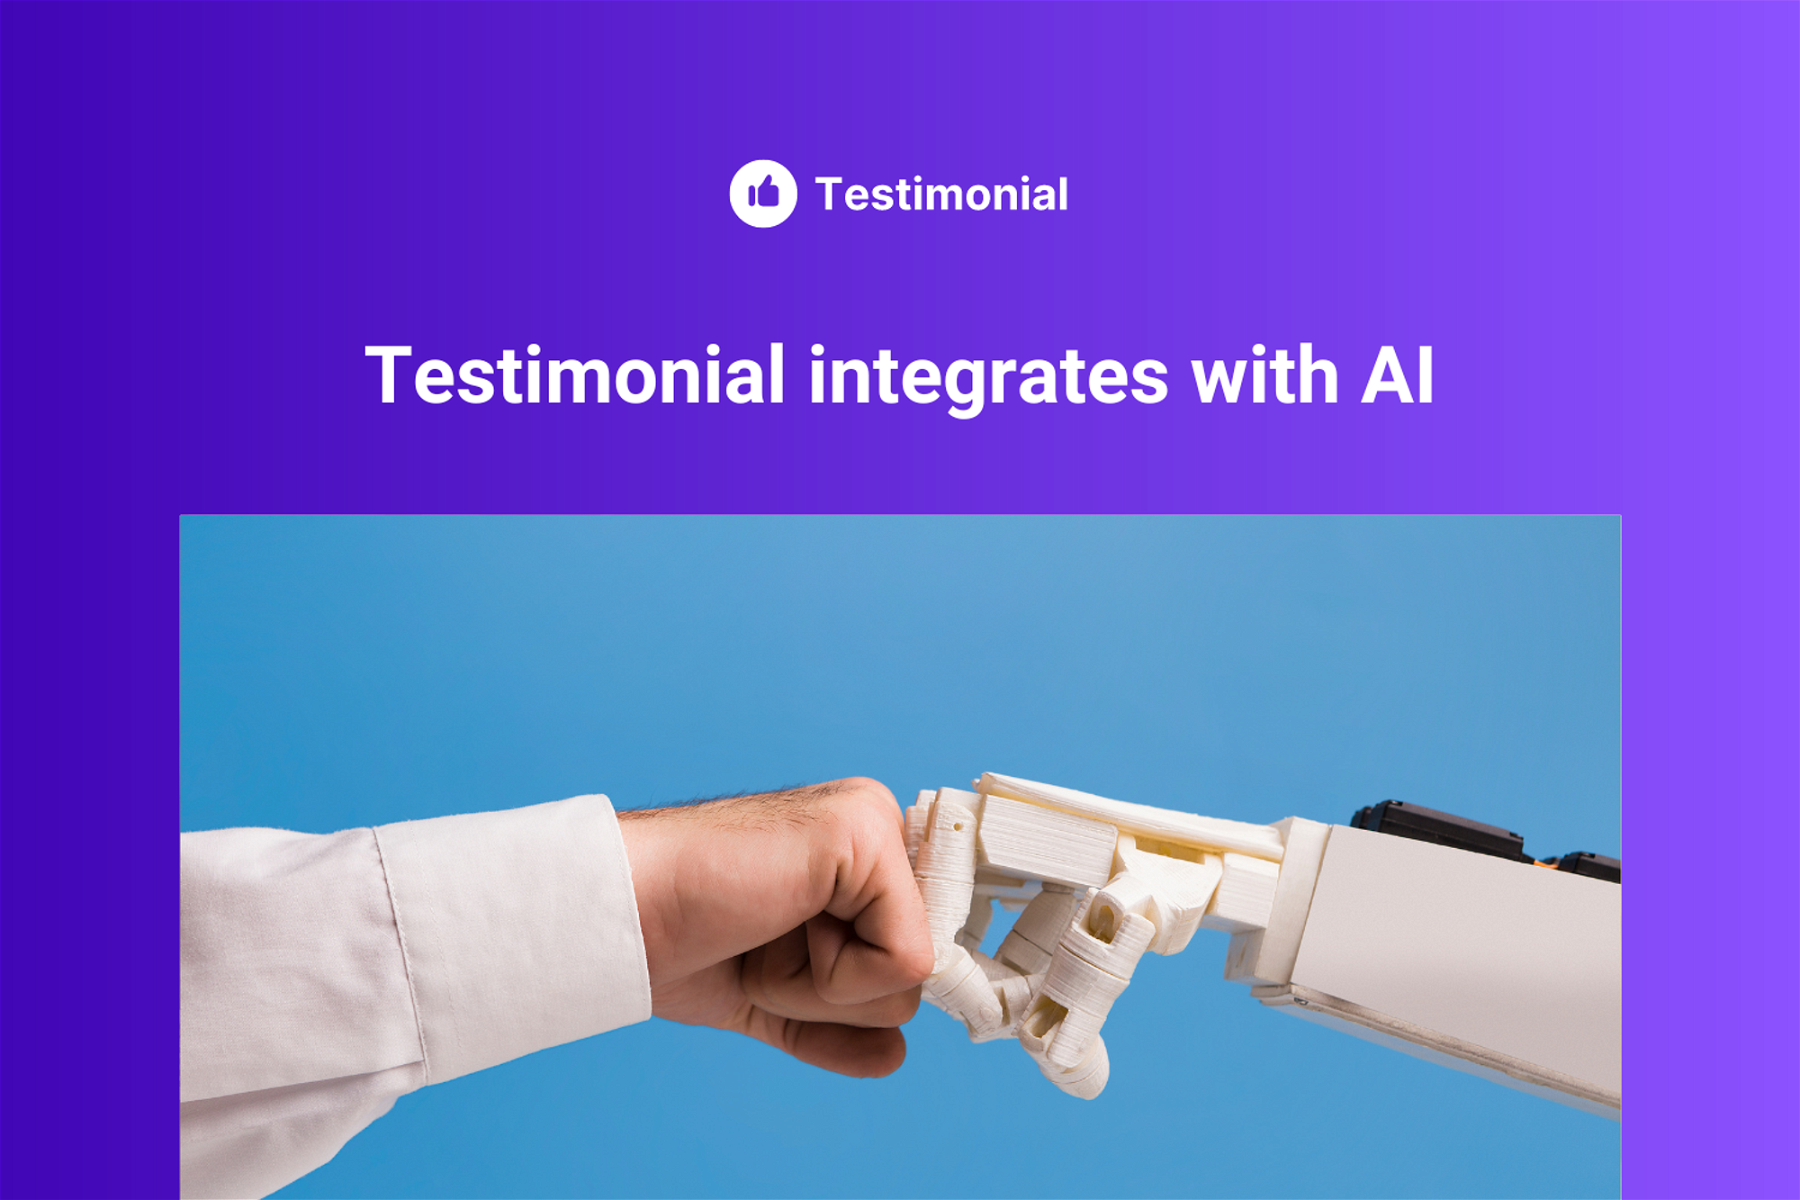 Testimonial.to integrates with AI to deliver the best testimonial campaign experience